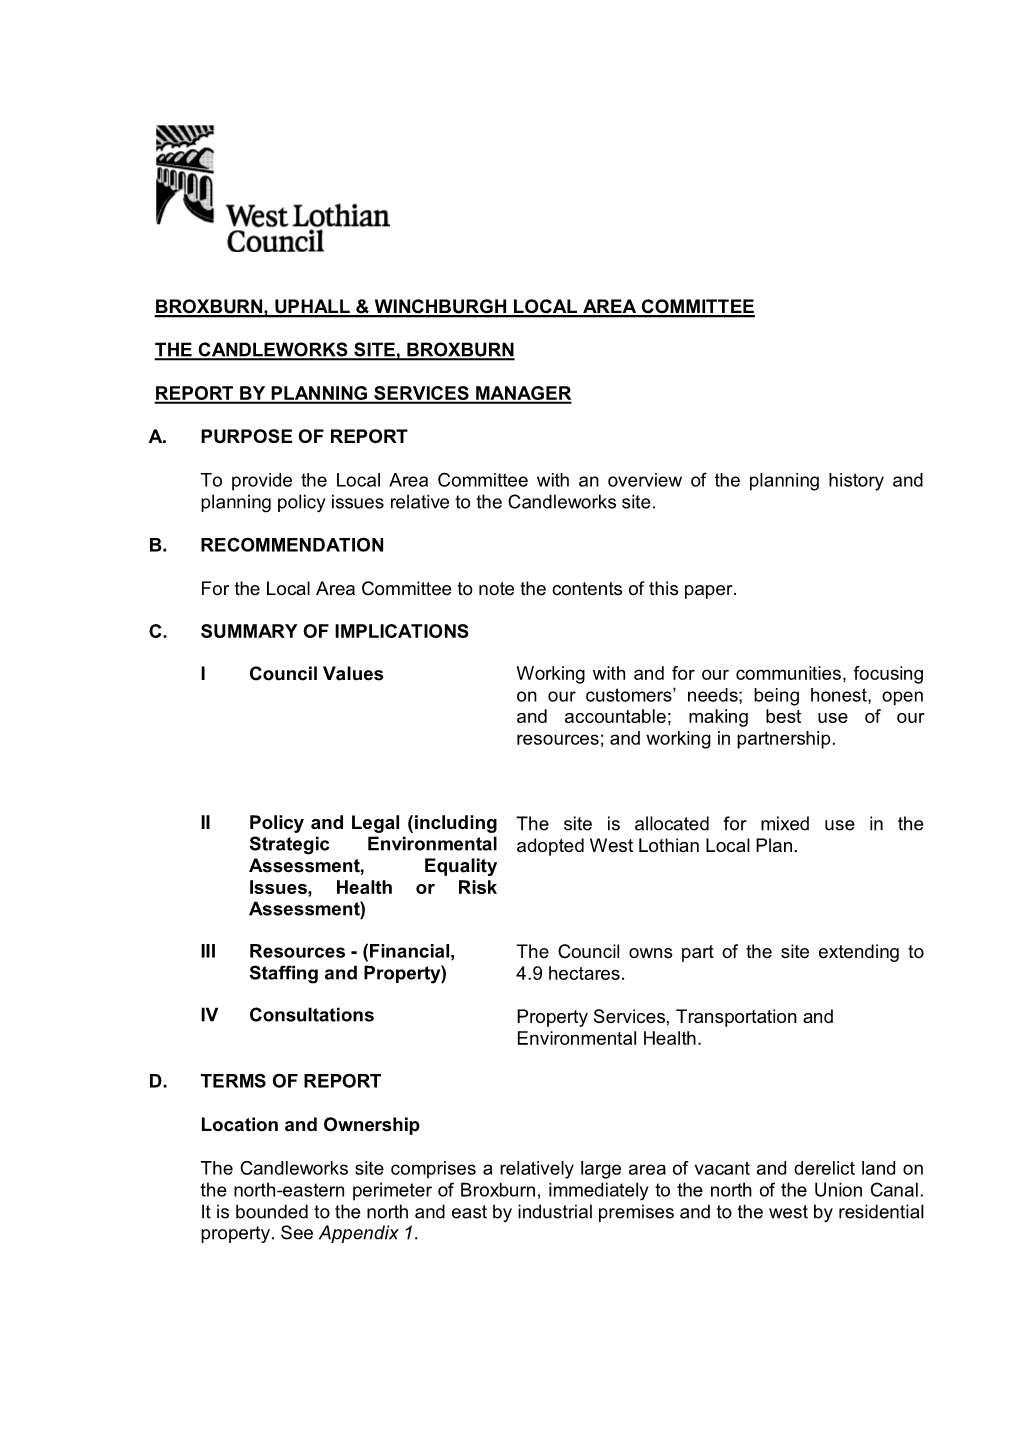 Broxburn, Uphall & Winchburgh Local Area Committee the Candleworks Site, Broxburn Report by Planning Services Manager A